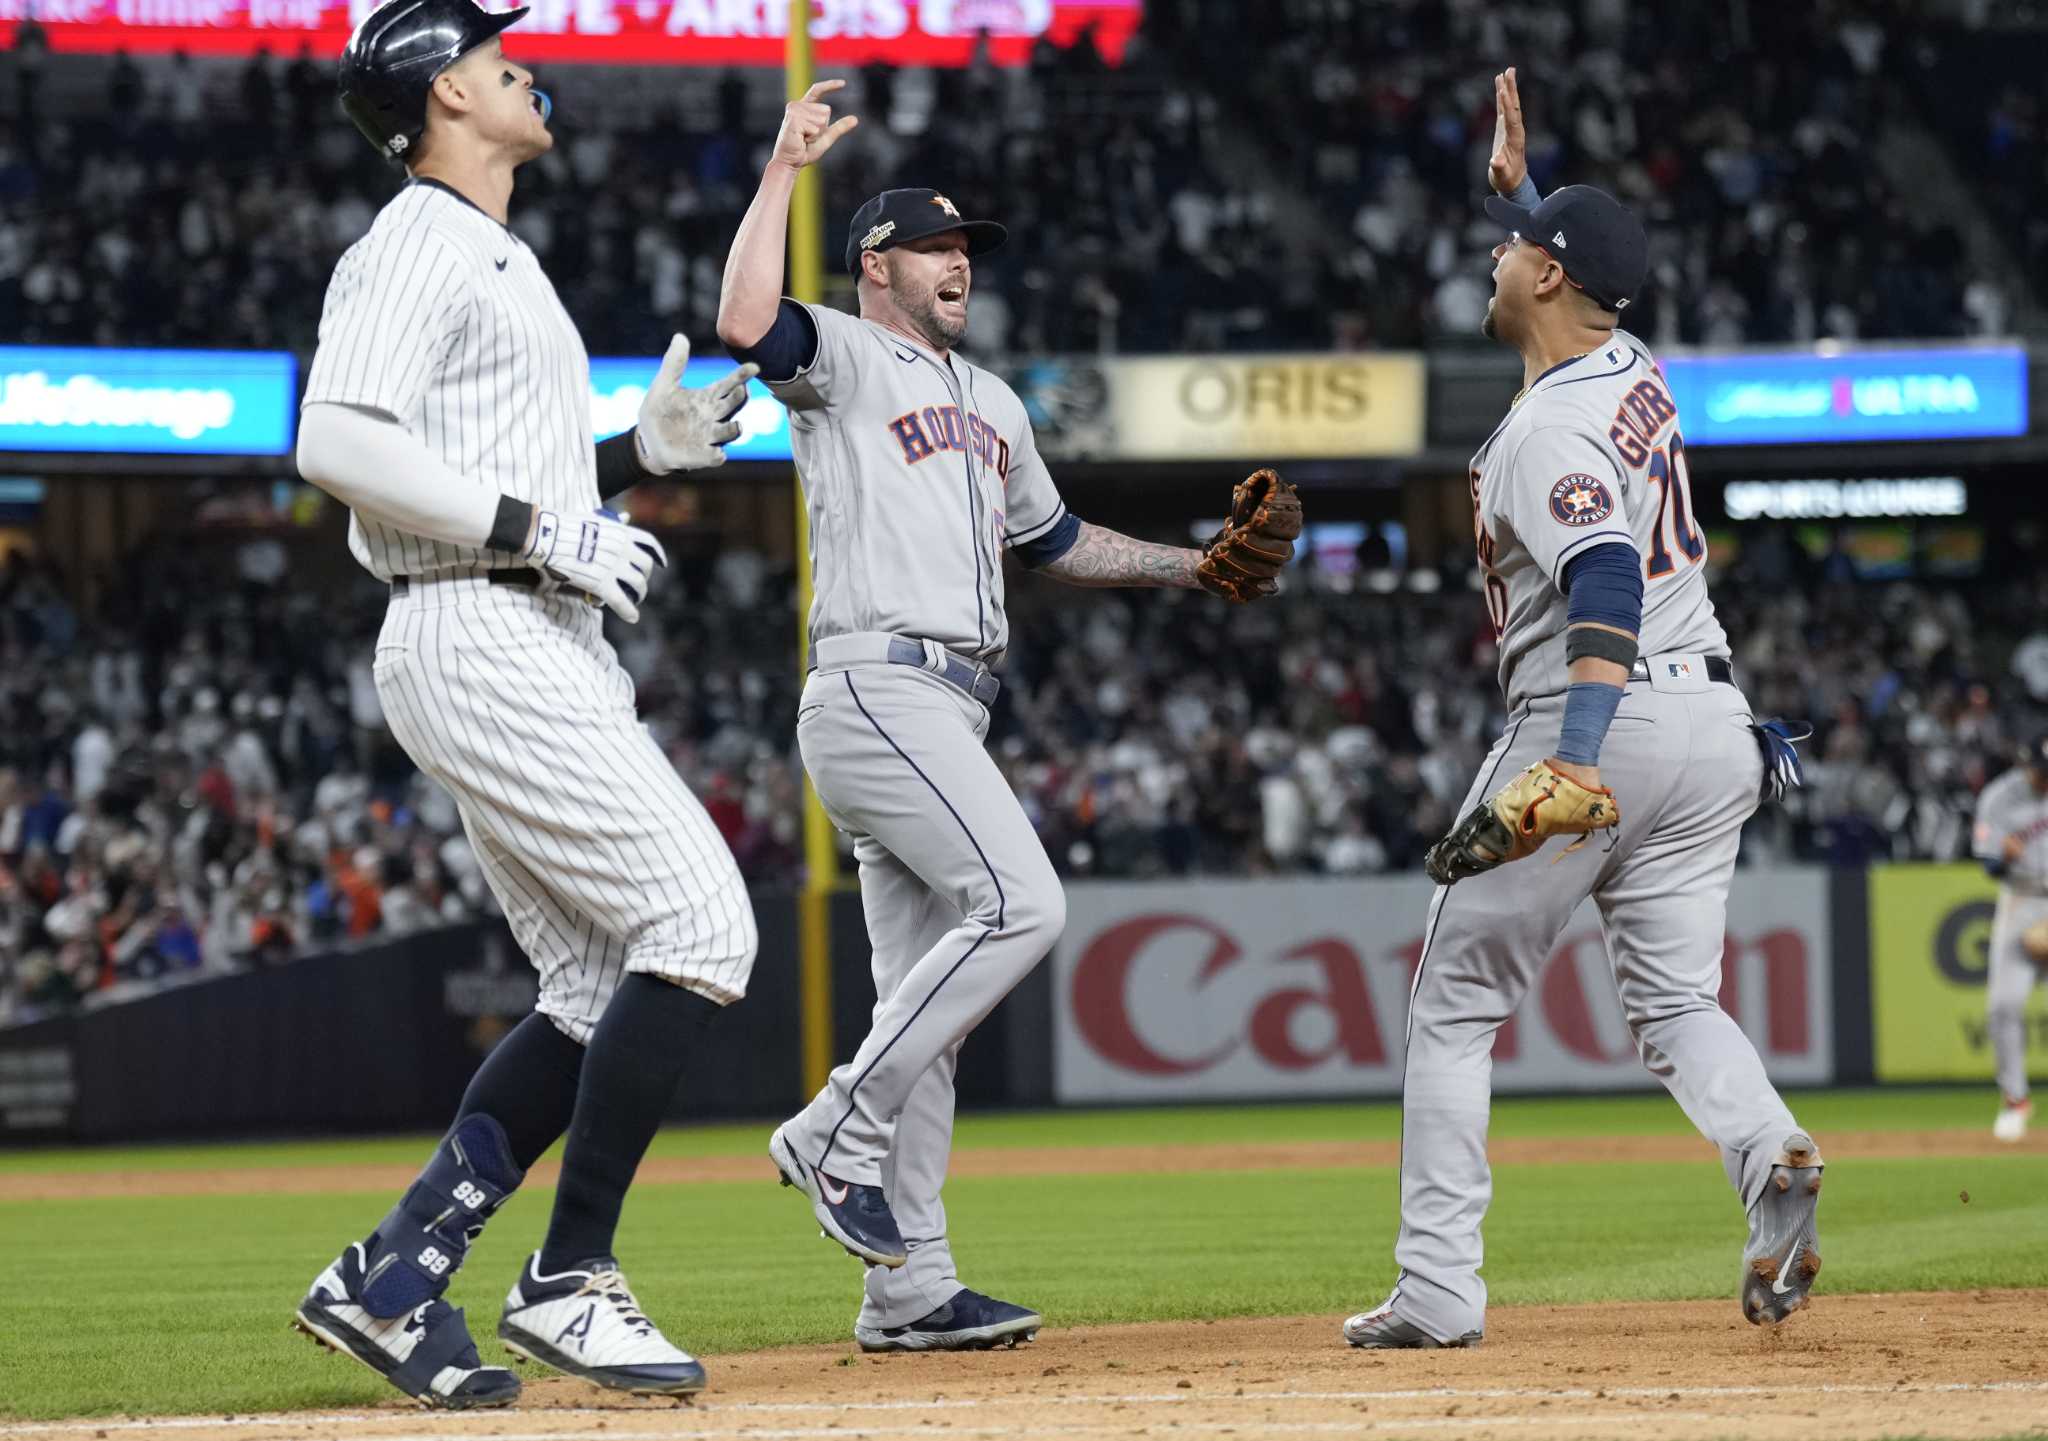 How prominent will Astros dominance be in new Yankees documentary?